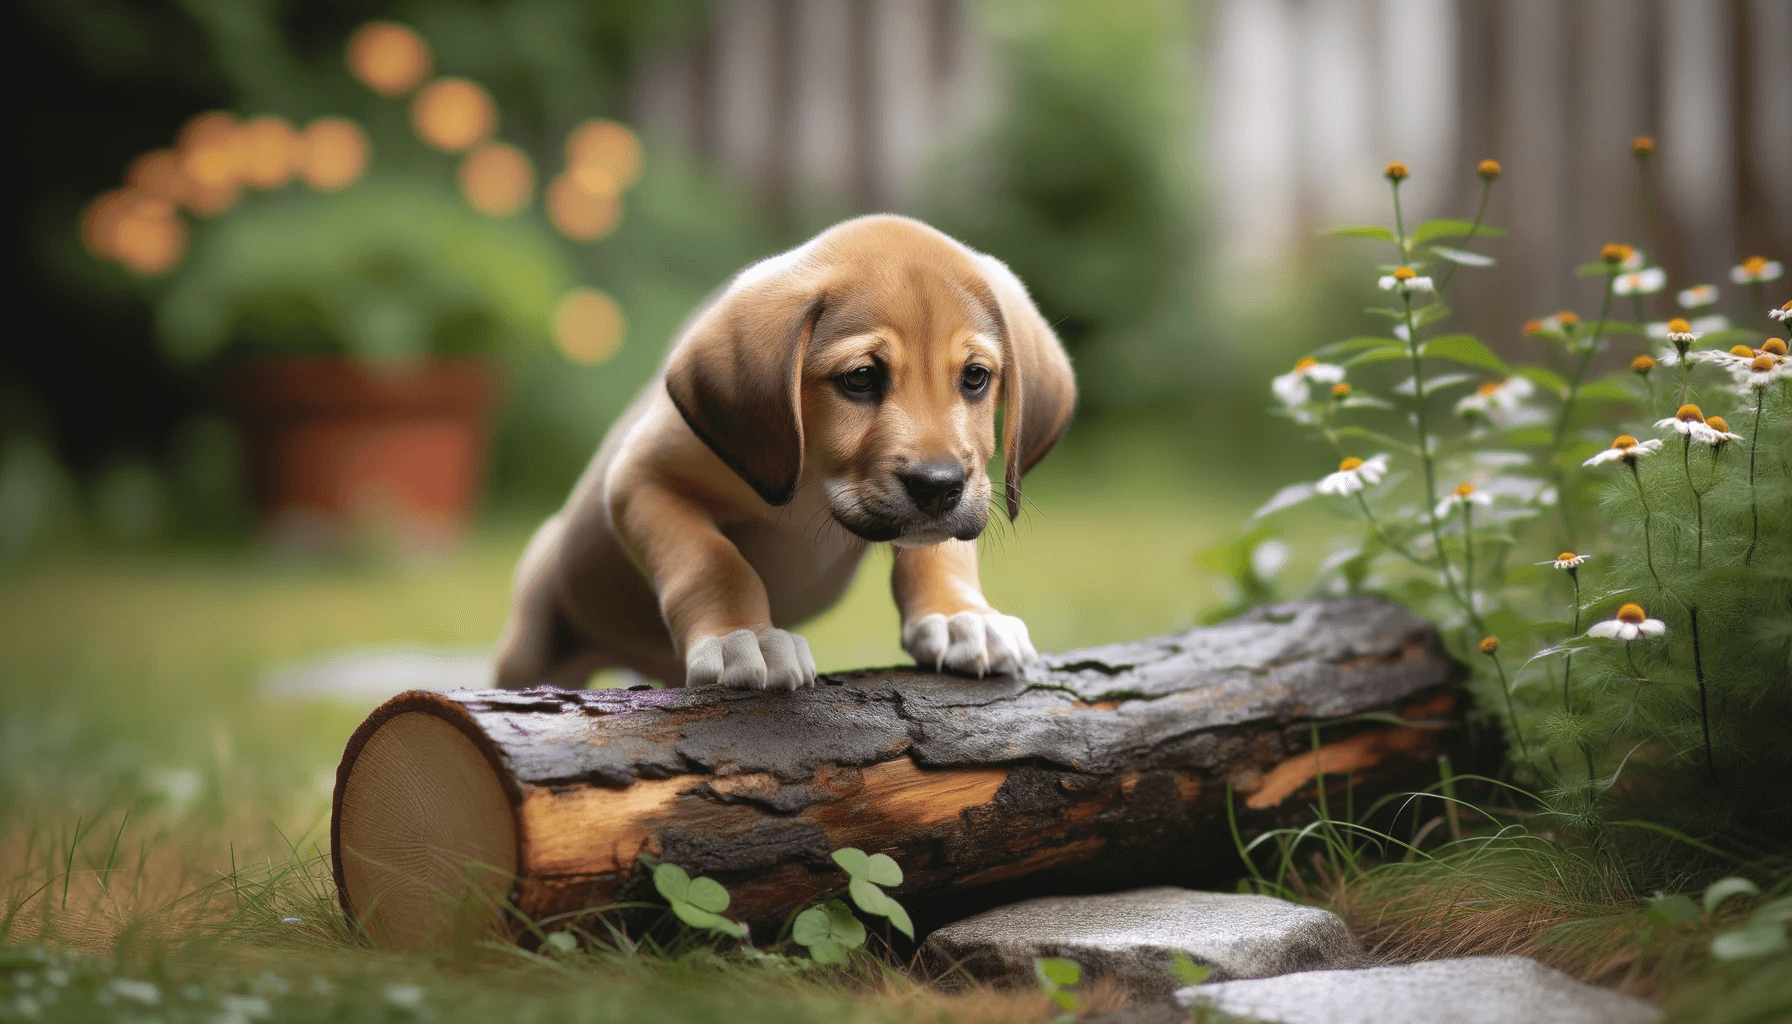 A Lab Hound Mix puppy cautiously stepping over a small obstacle, showing its adventurous spirit